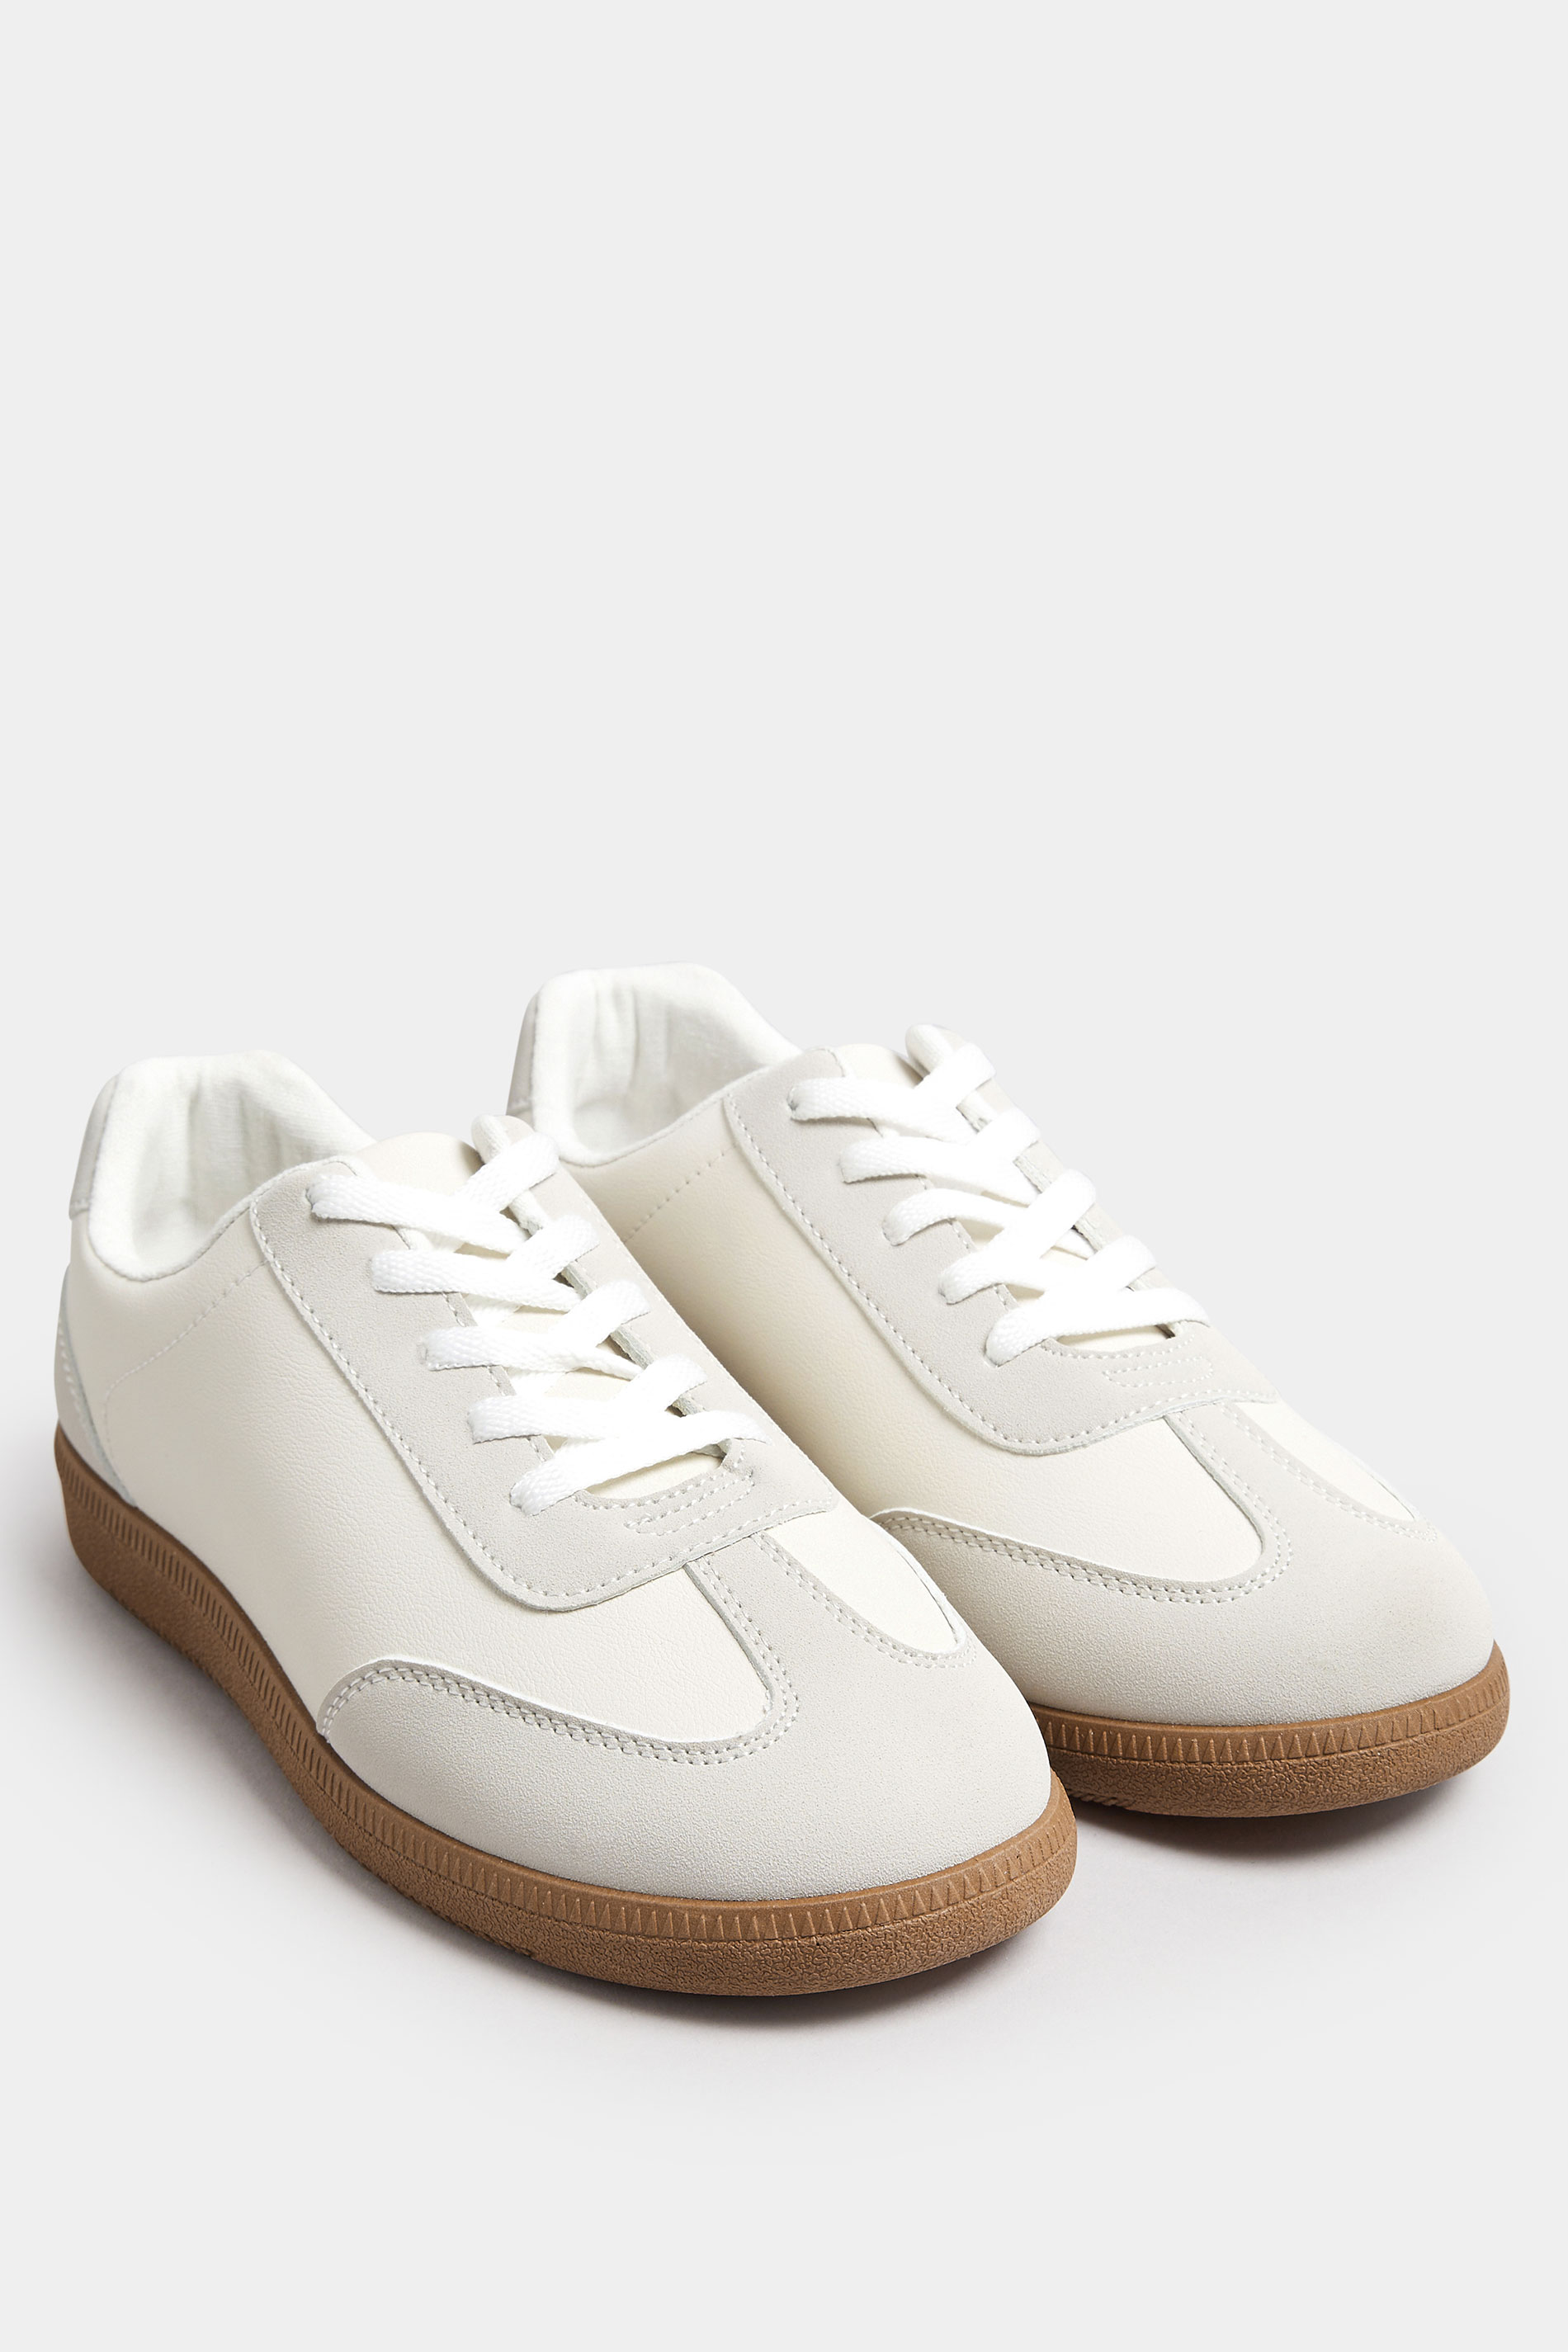 White Retro Gum Sole Trainers In Extra Wide EEE Fit | Yours Clothing 2